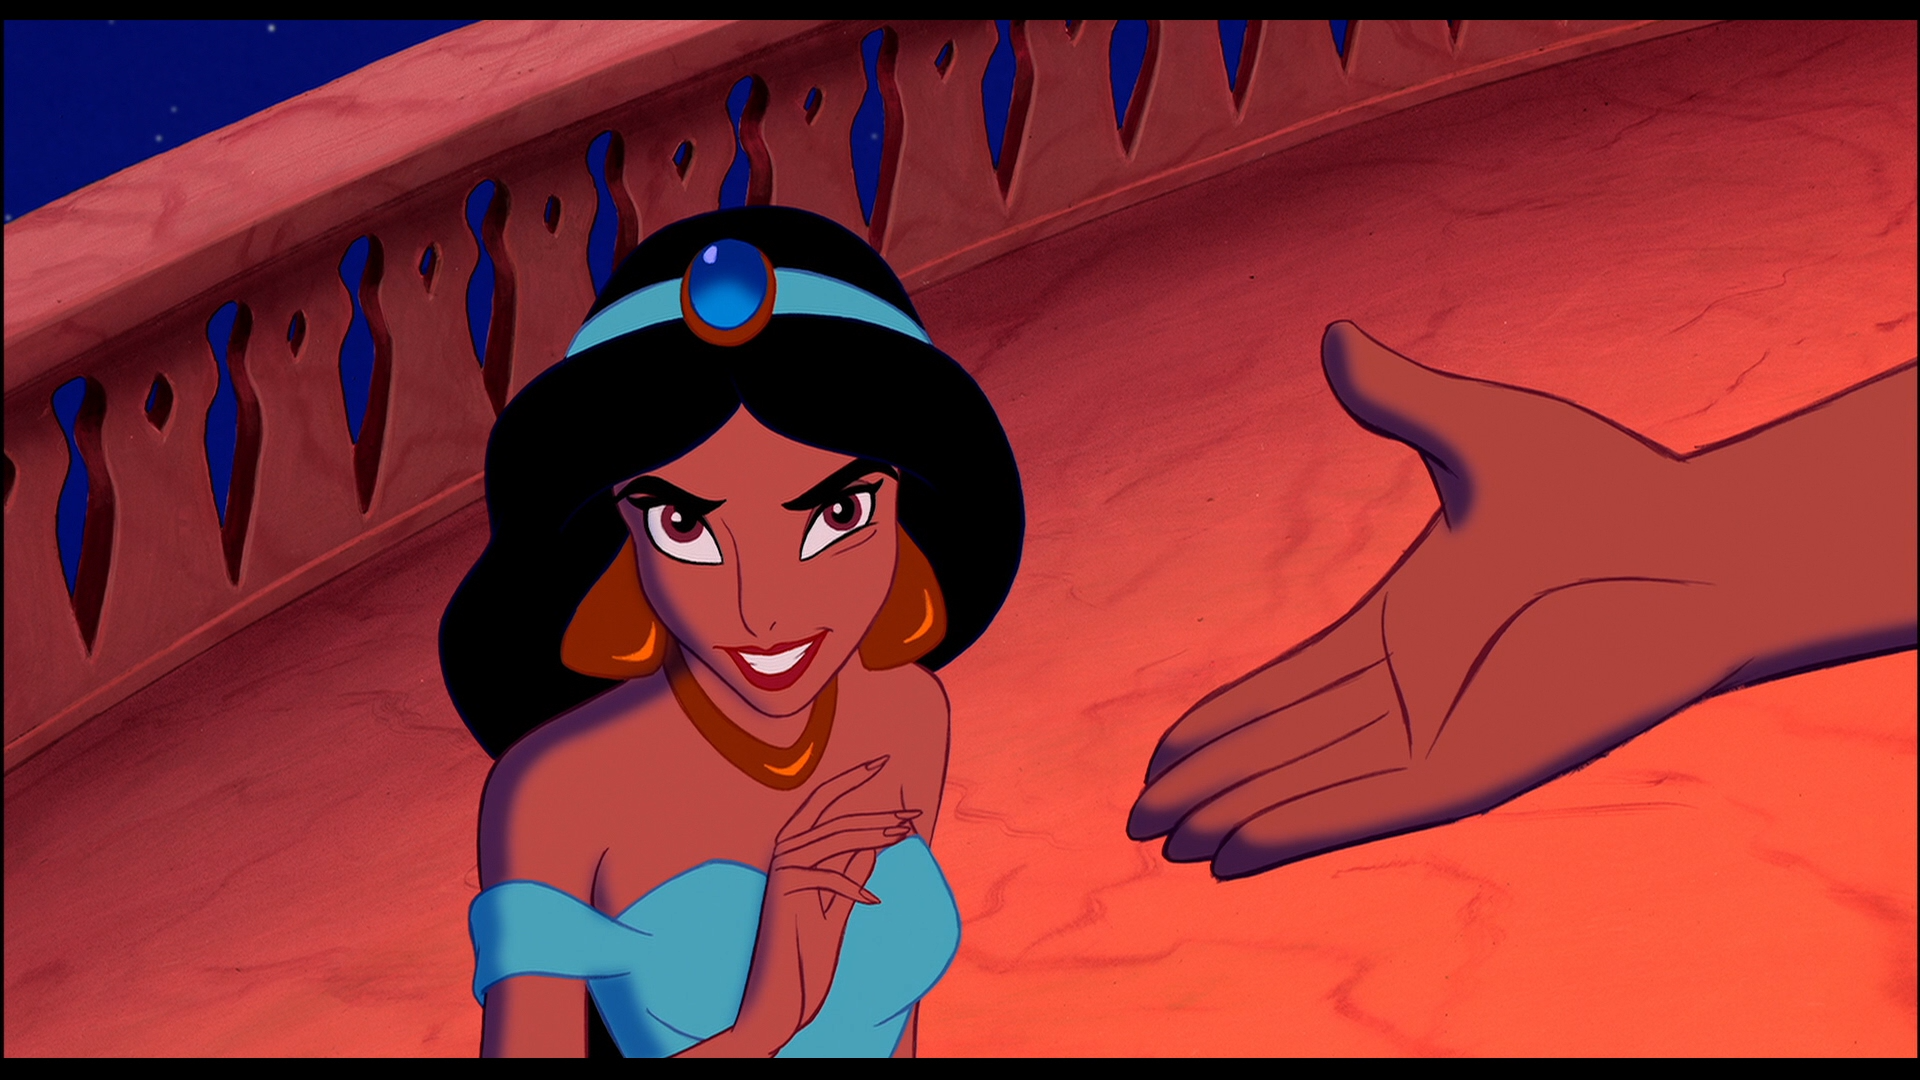 Amazing Disney's Aladdin Pictures & Backgrounds